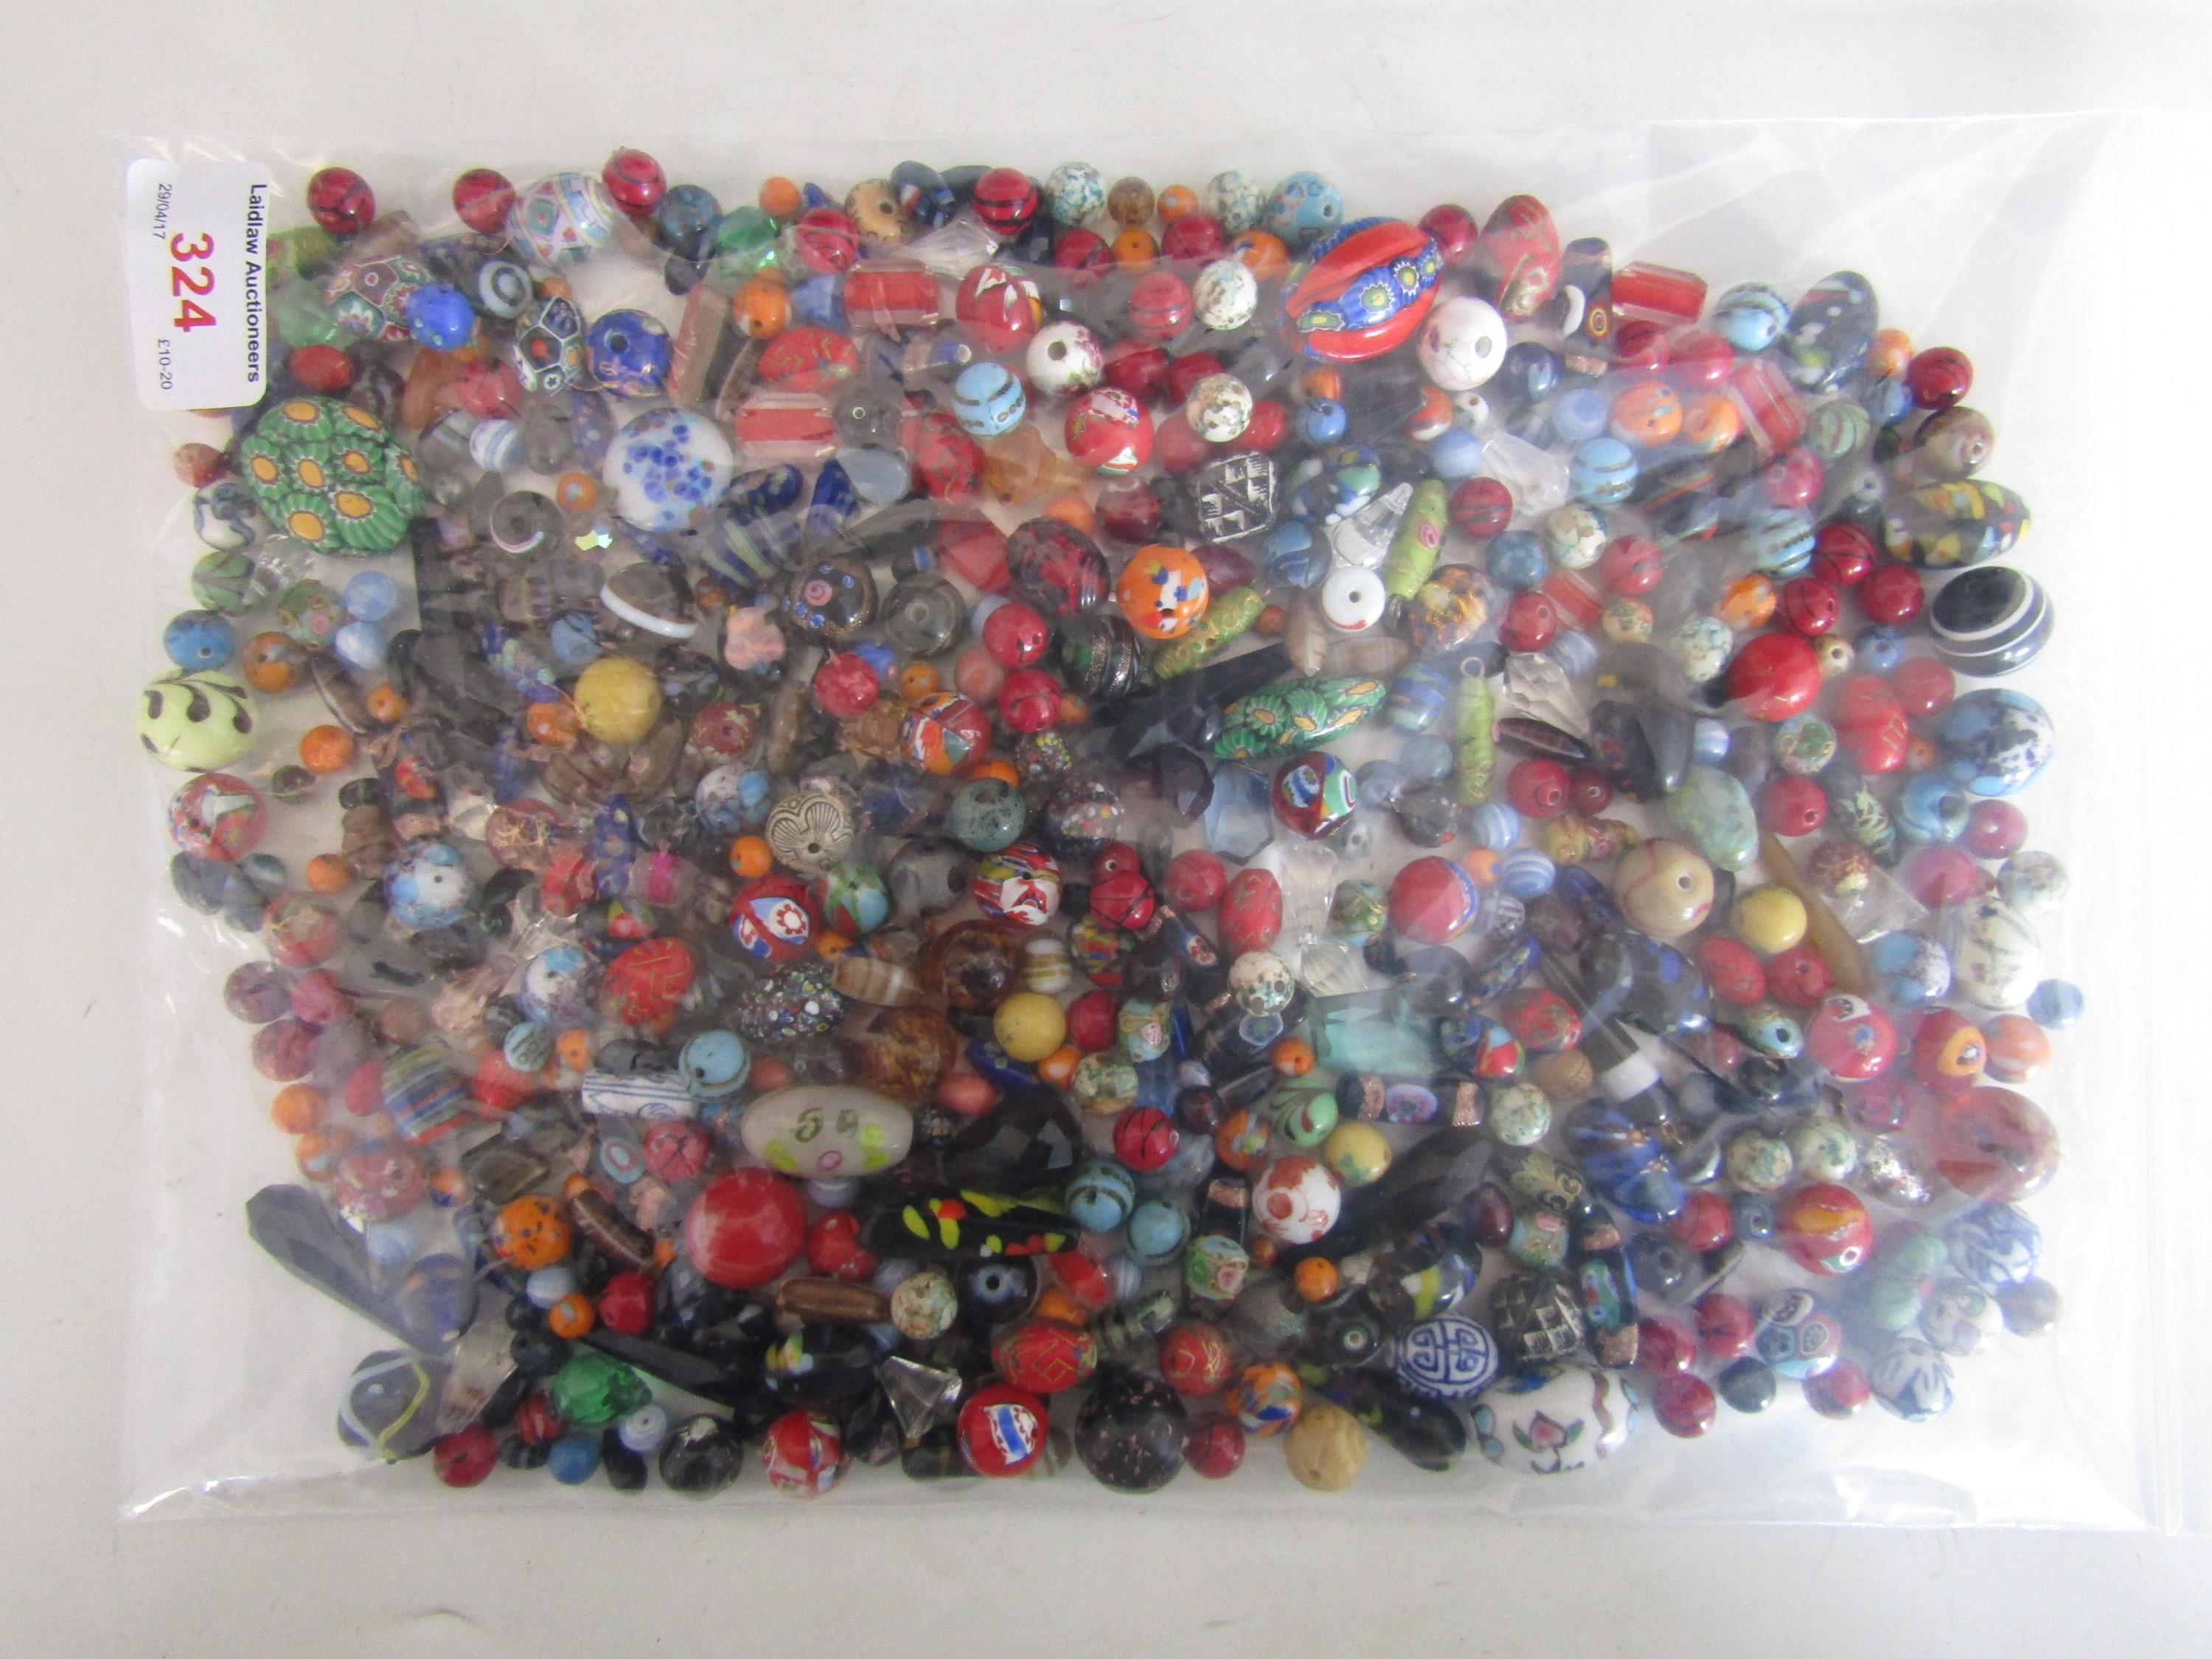 A large quantity of vintage glass and composition lampwork and other beads in tones of red, black